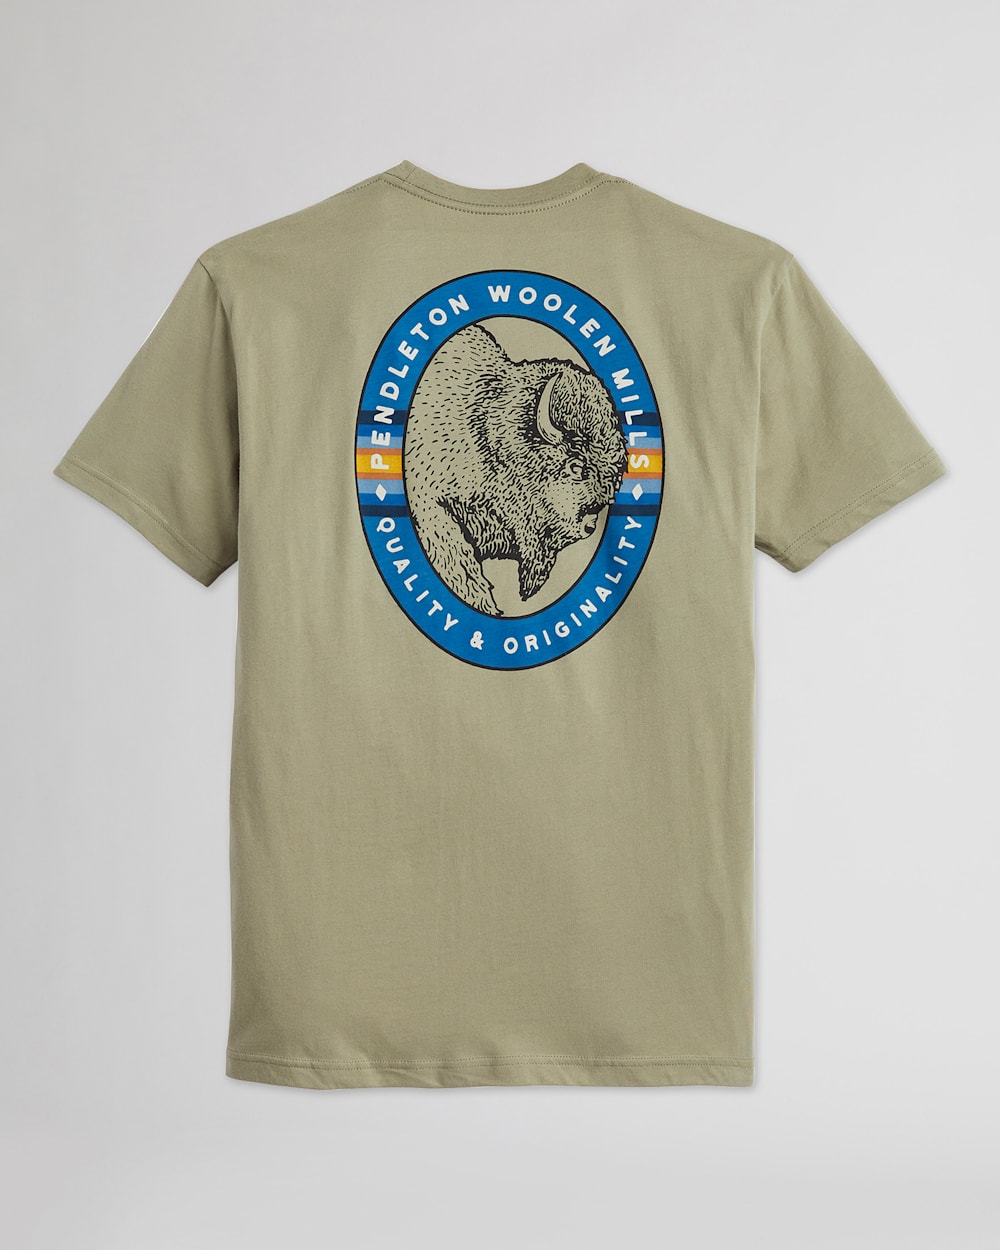 ALTERNATE VIEW OF MEN'S BISON HEAD GRAPHIC TEE IN LIGHT OLIVE/MULTI image number 7